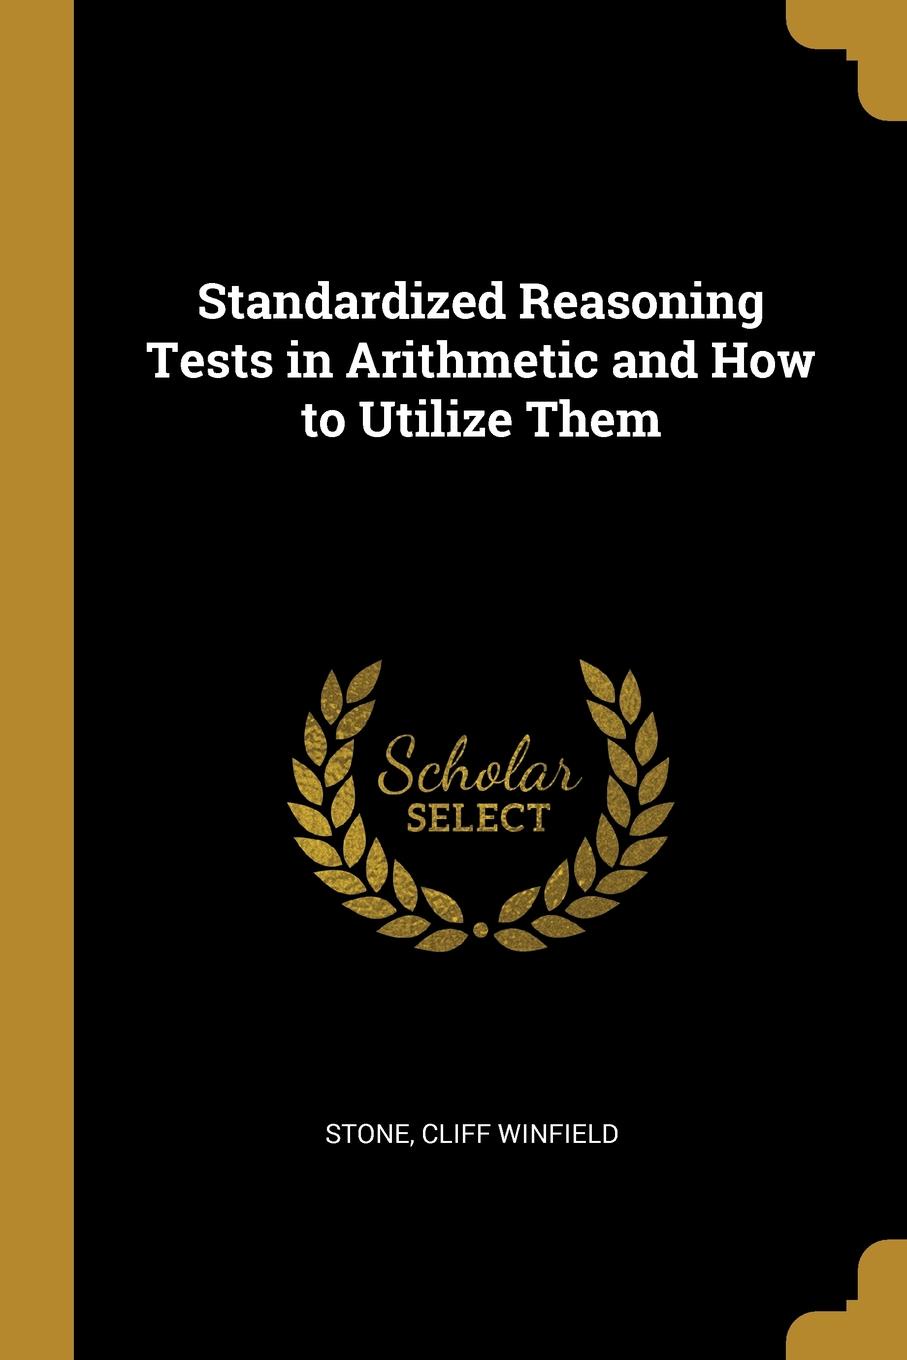 Standardized Reasoning Tests in Arithmetic and How to Utilize Them